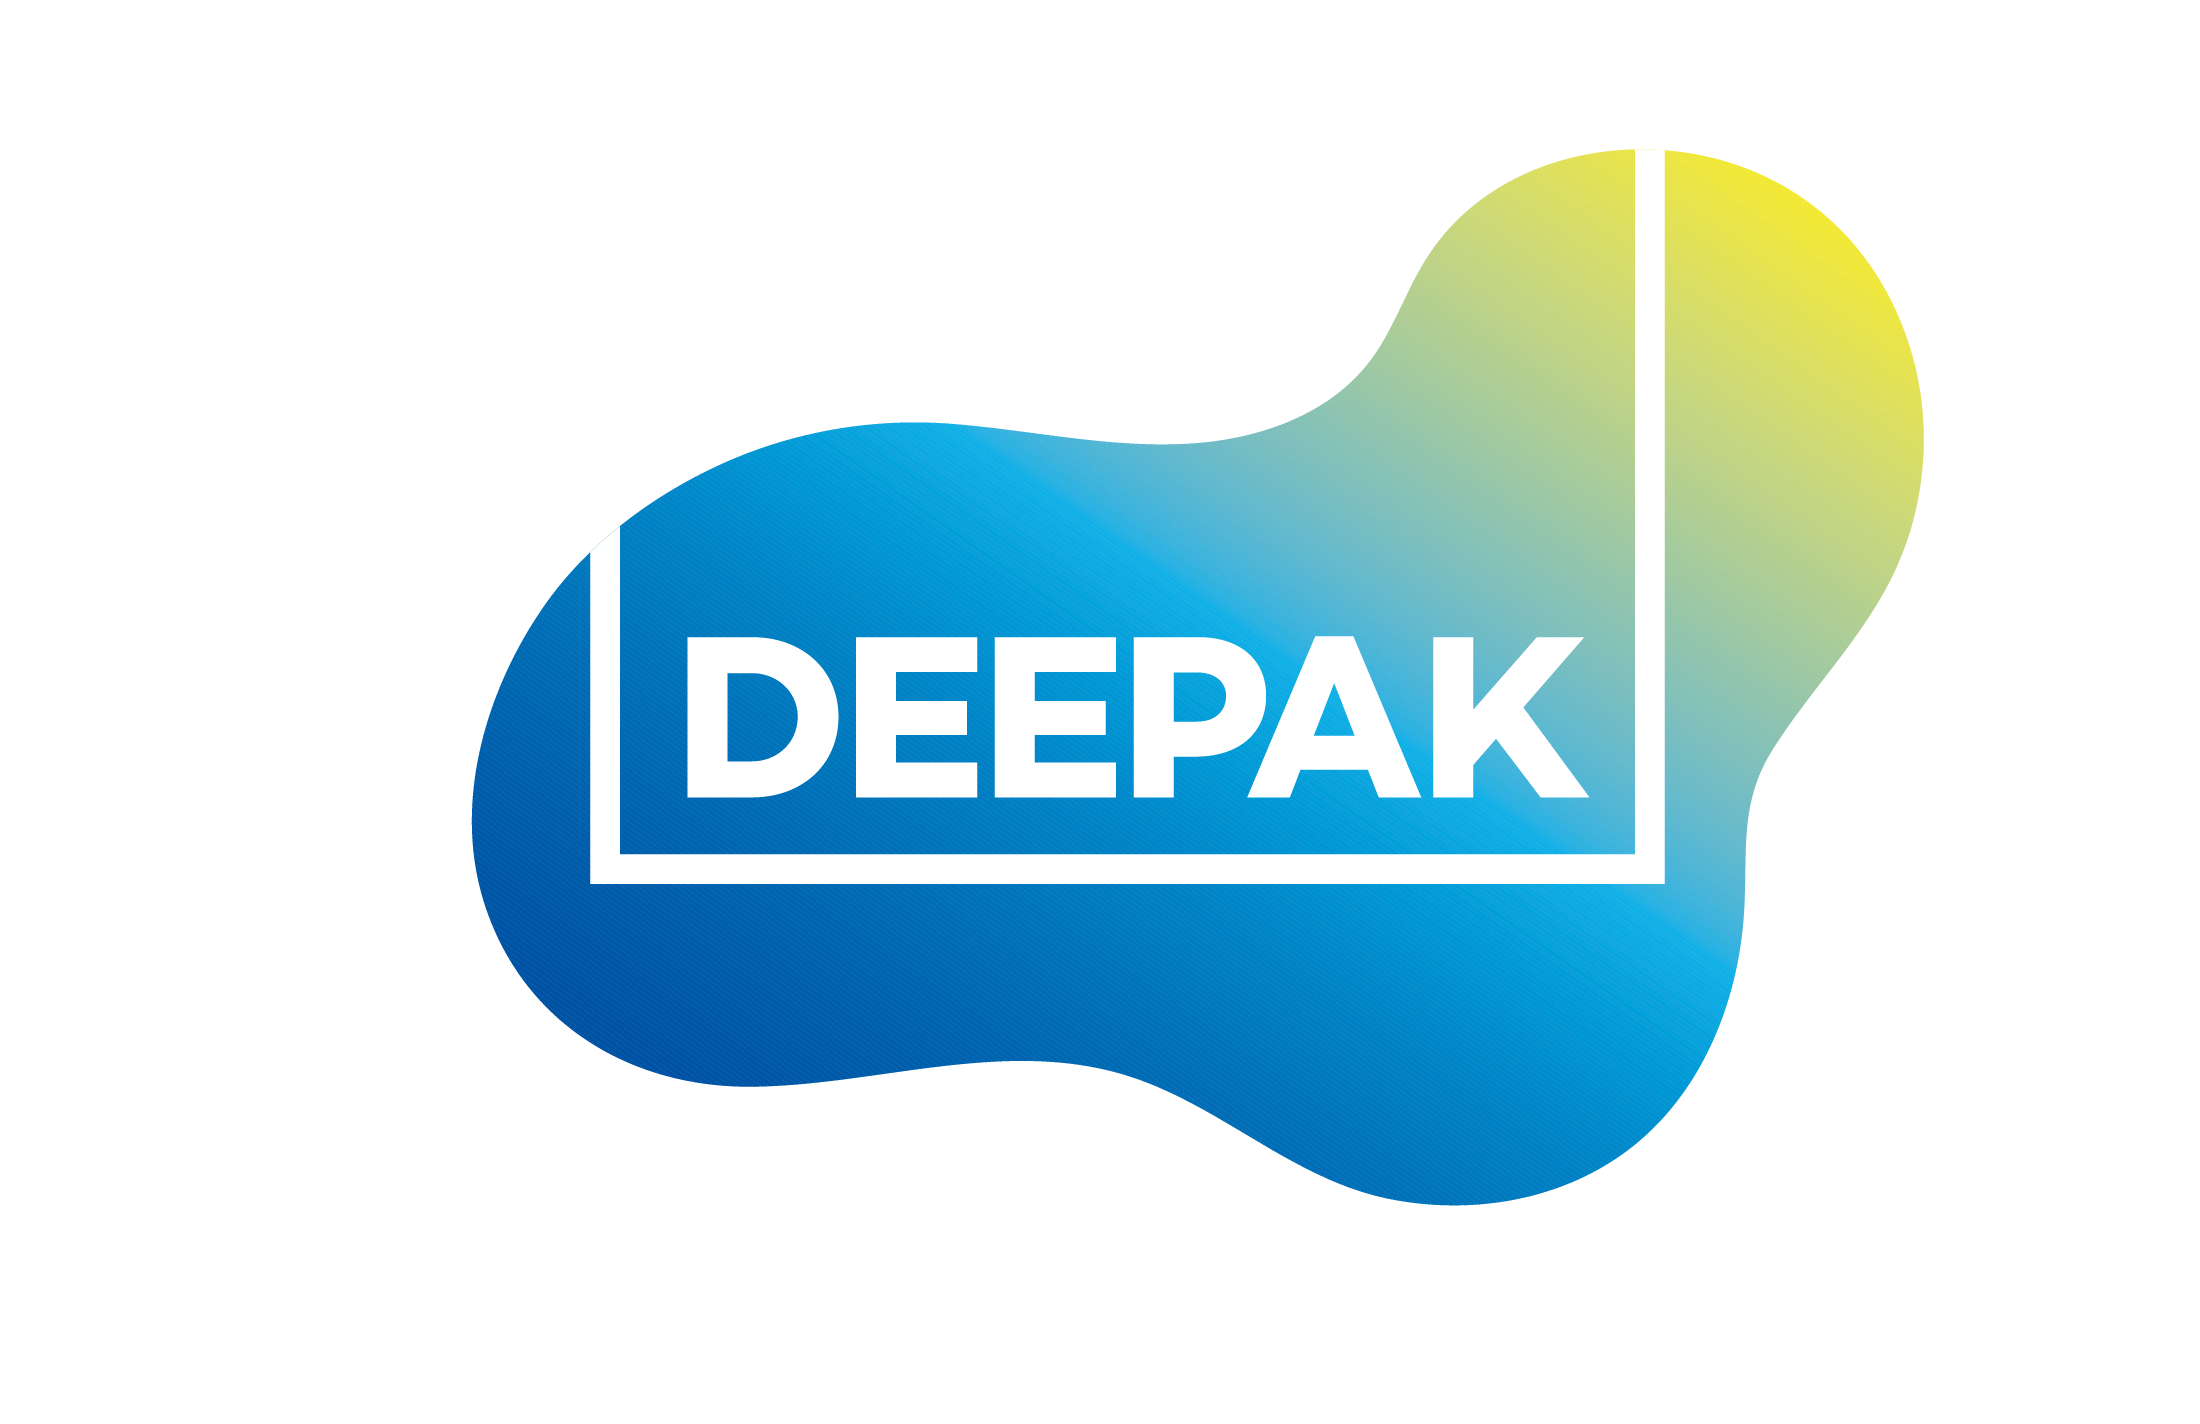 Deepak Nitrate slapped with closure notice following accidental fire